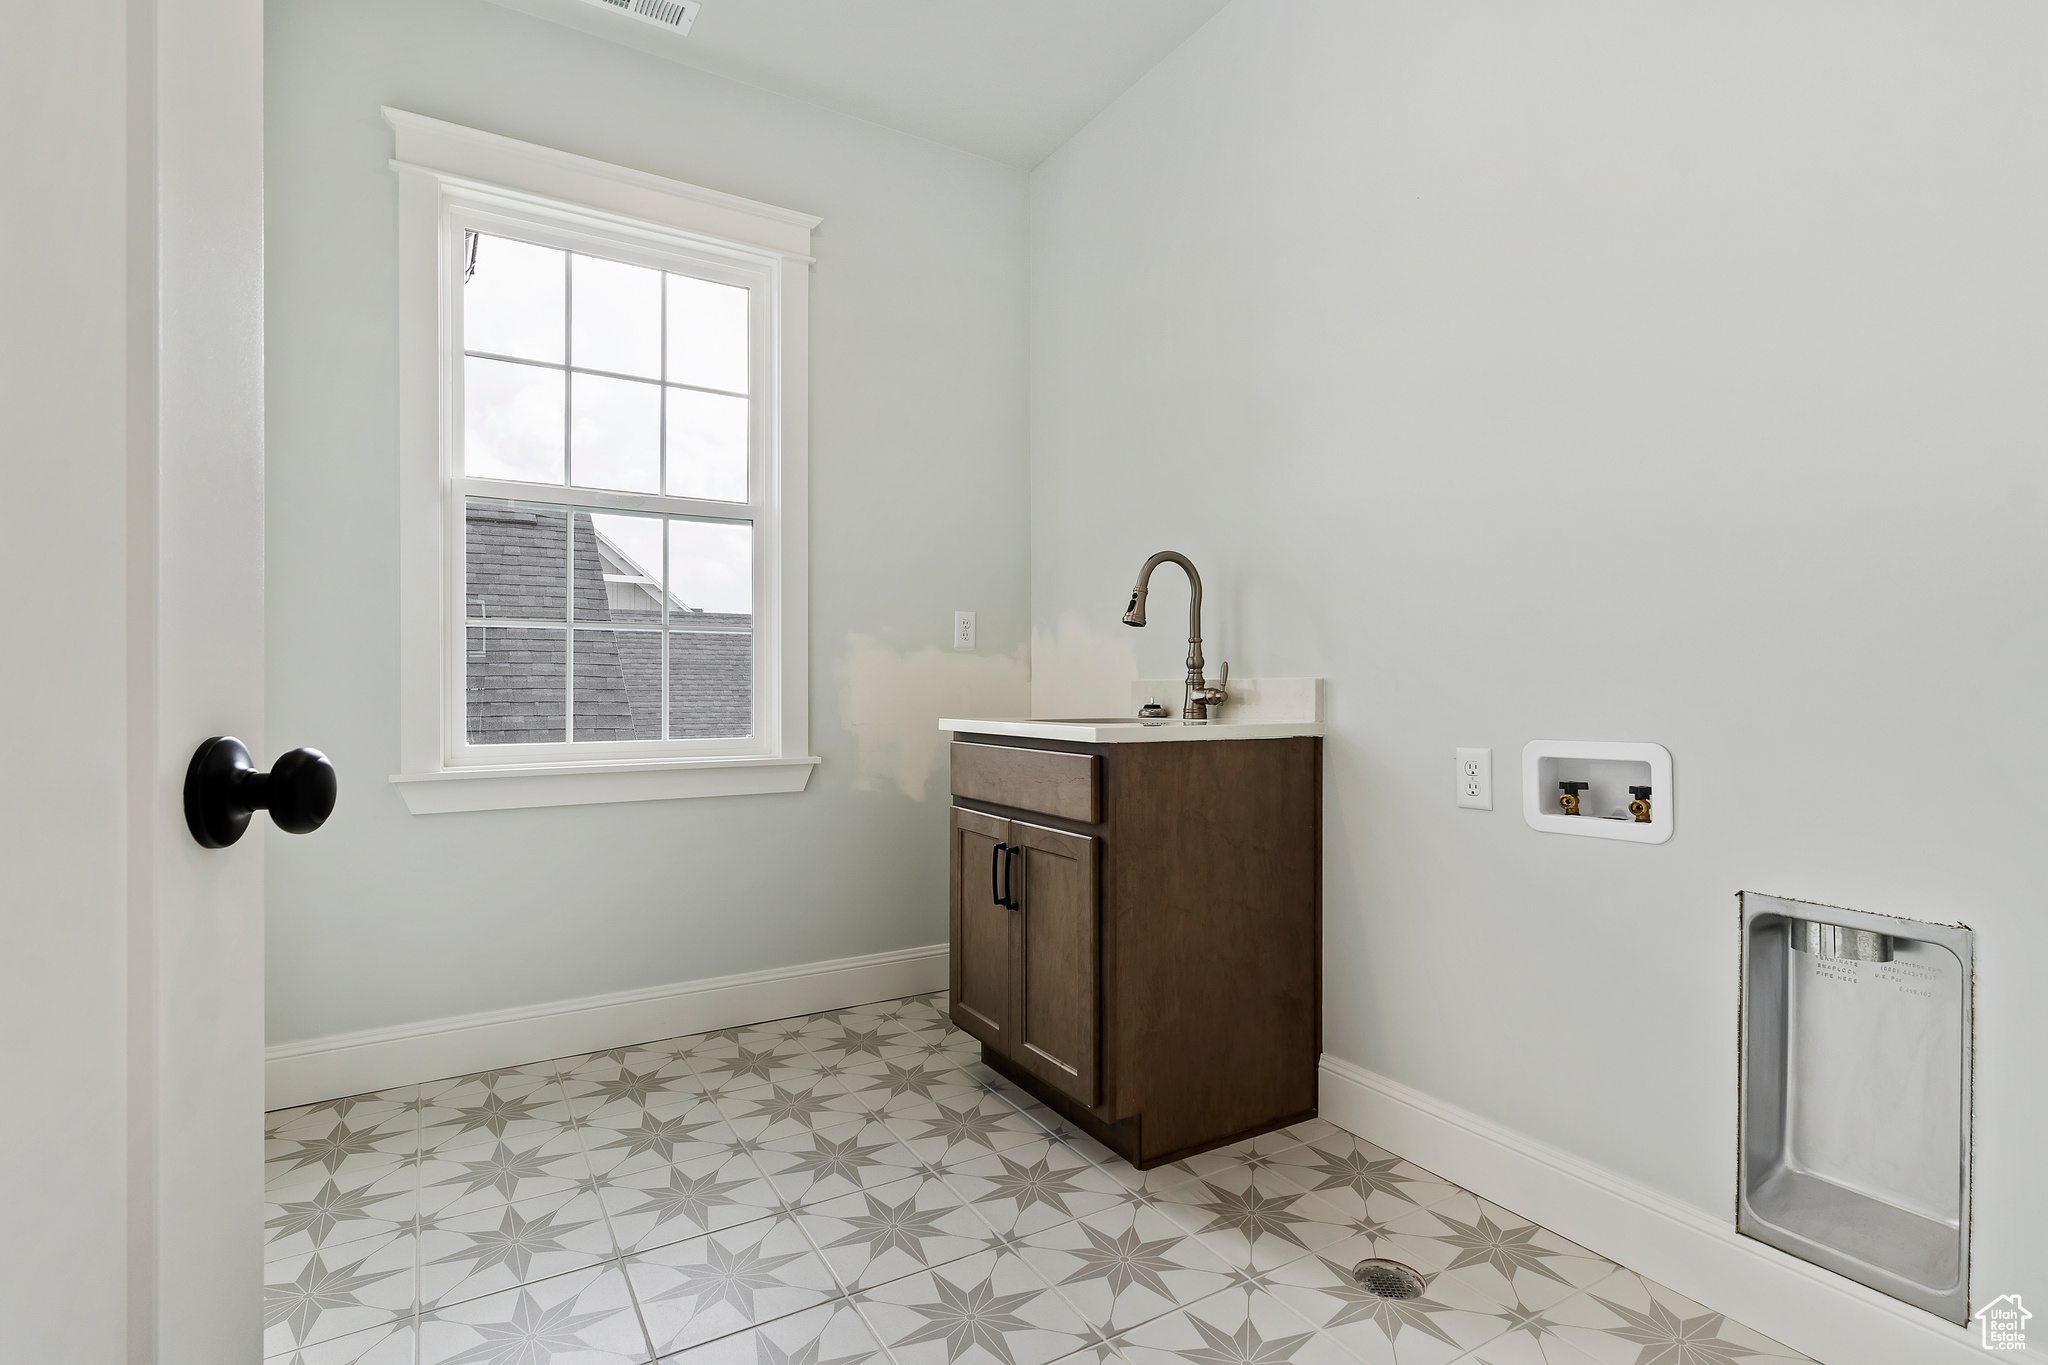 Washroom featuring light tile flooring, cabinets, hookup for a washing machine, and sink